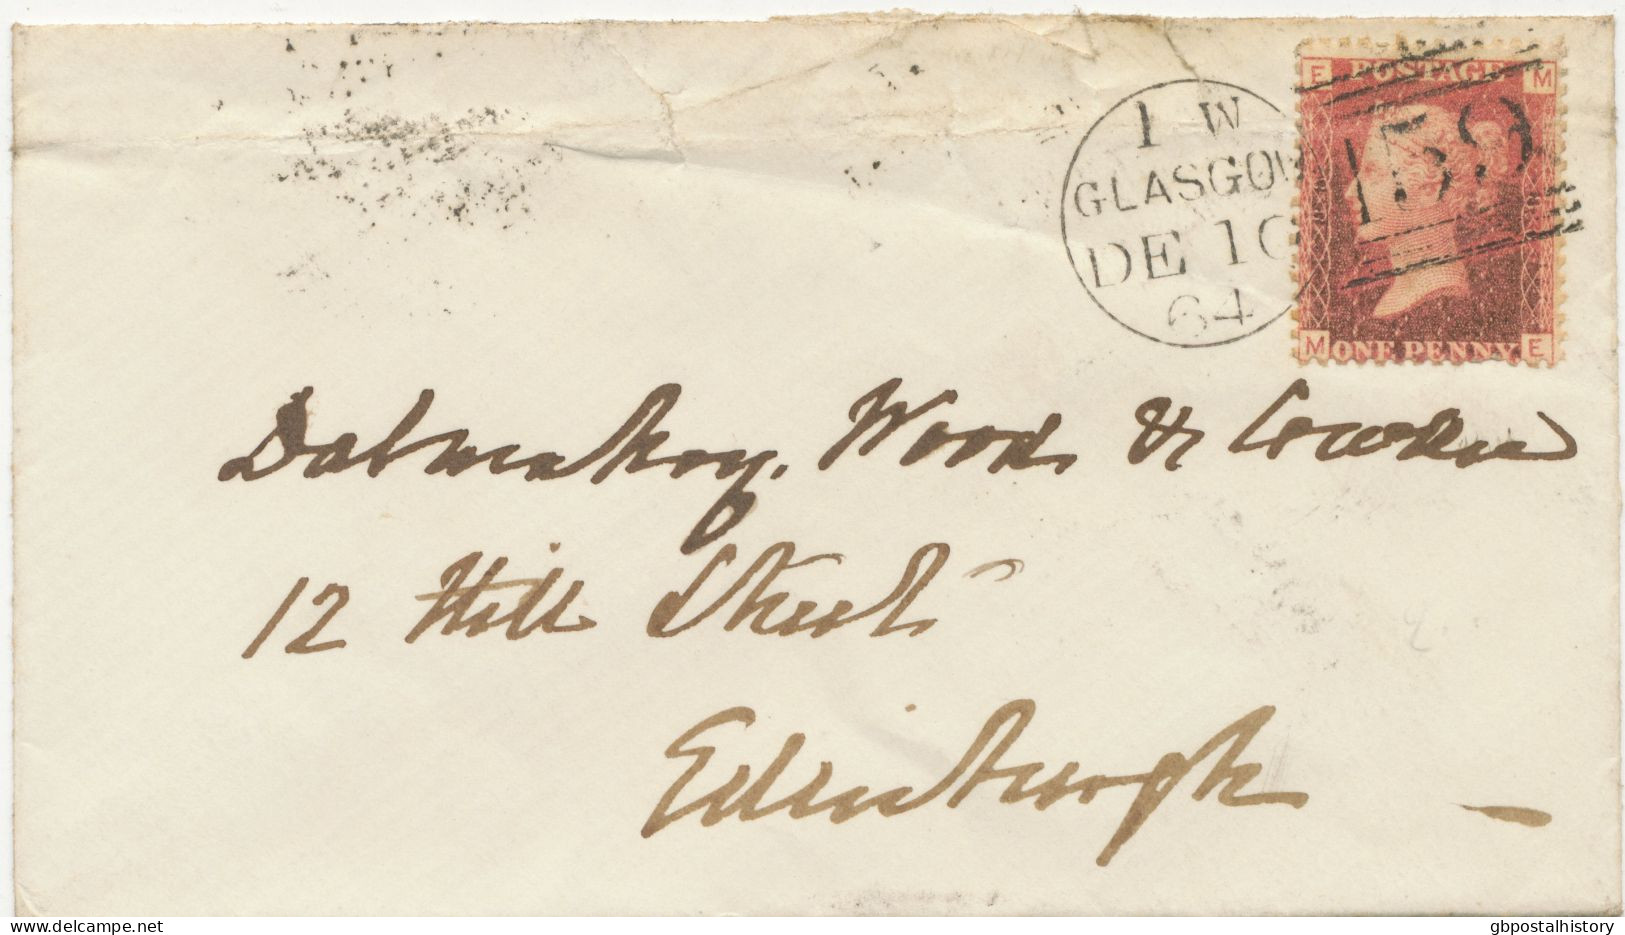 GB „159 / GLASGOW“ Scottish Duplex (6 THIN Bars W Different Length, Timecode „1 W“, Datepart 19till20mm) Cover Pl.83 - Lettres & Documents